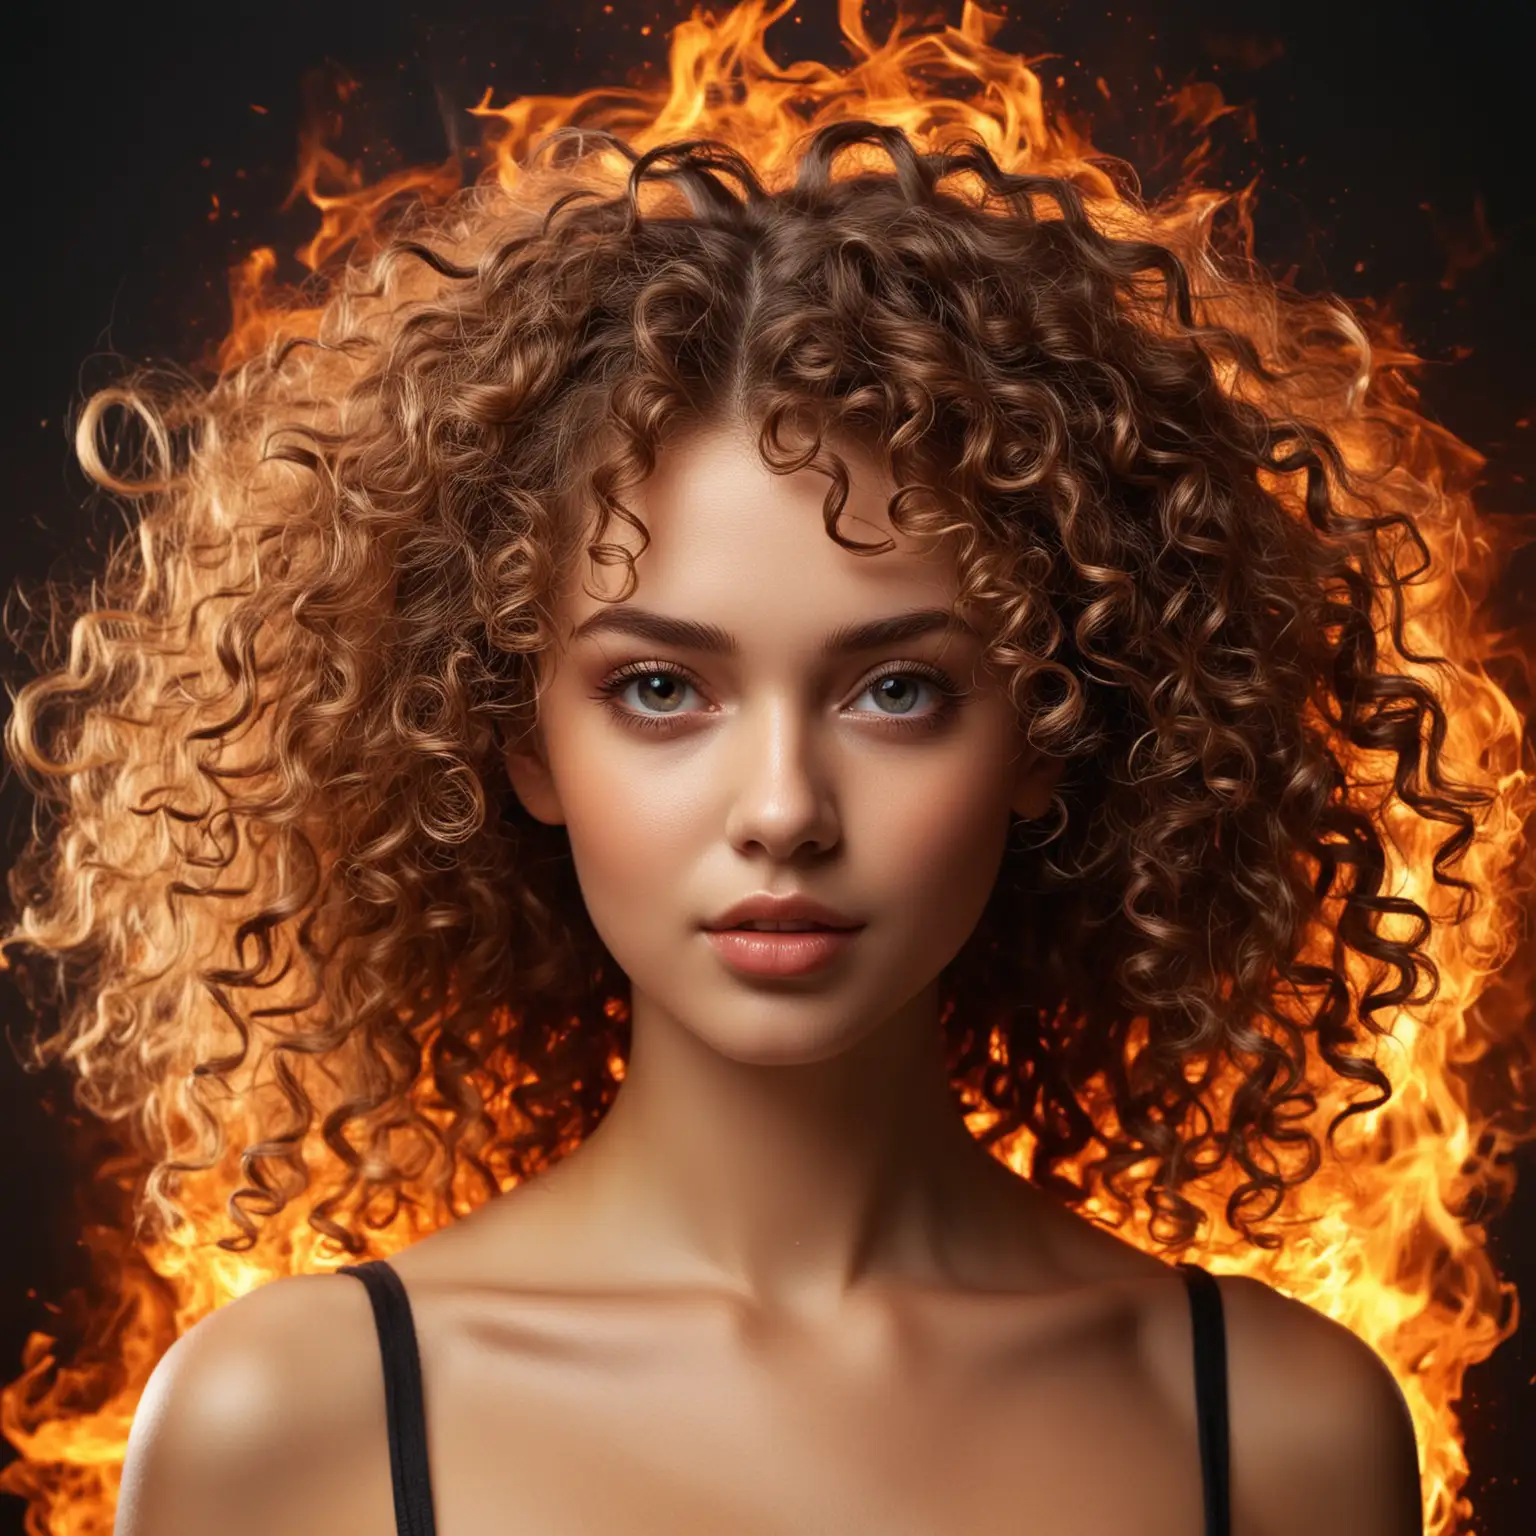 Vibrant-Modern-Girl-with-Fiery-Curly-Hair-Abstract-Portrait